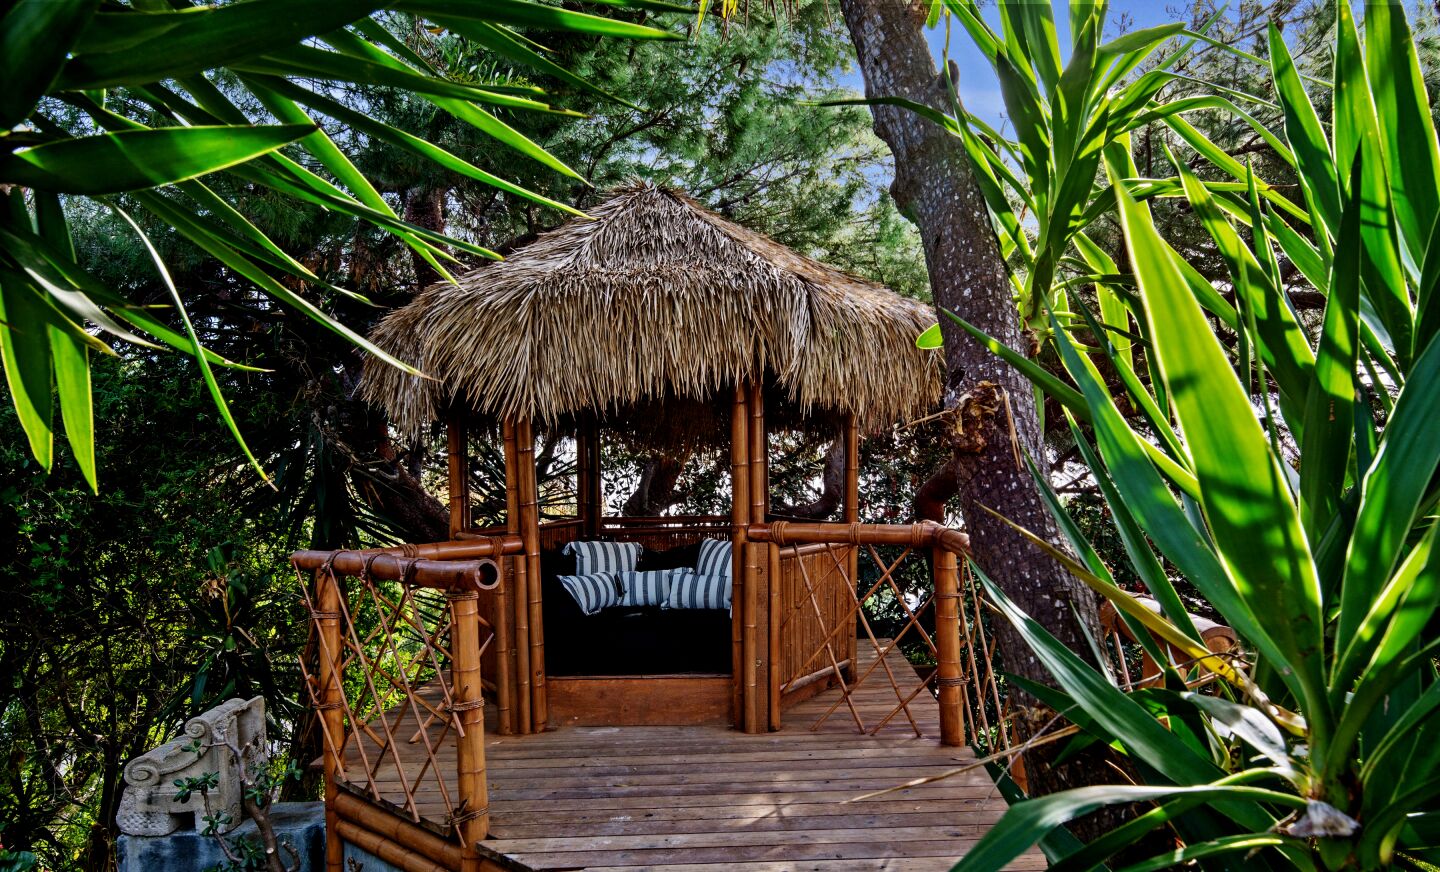 Tropical landscaping creates a backdrop for an adult treehouse, hidden pathways and a hammock installed between two trees. There's also a 12-person spa and an infinity-edge pool that can be controlled by a smartphone.